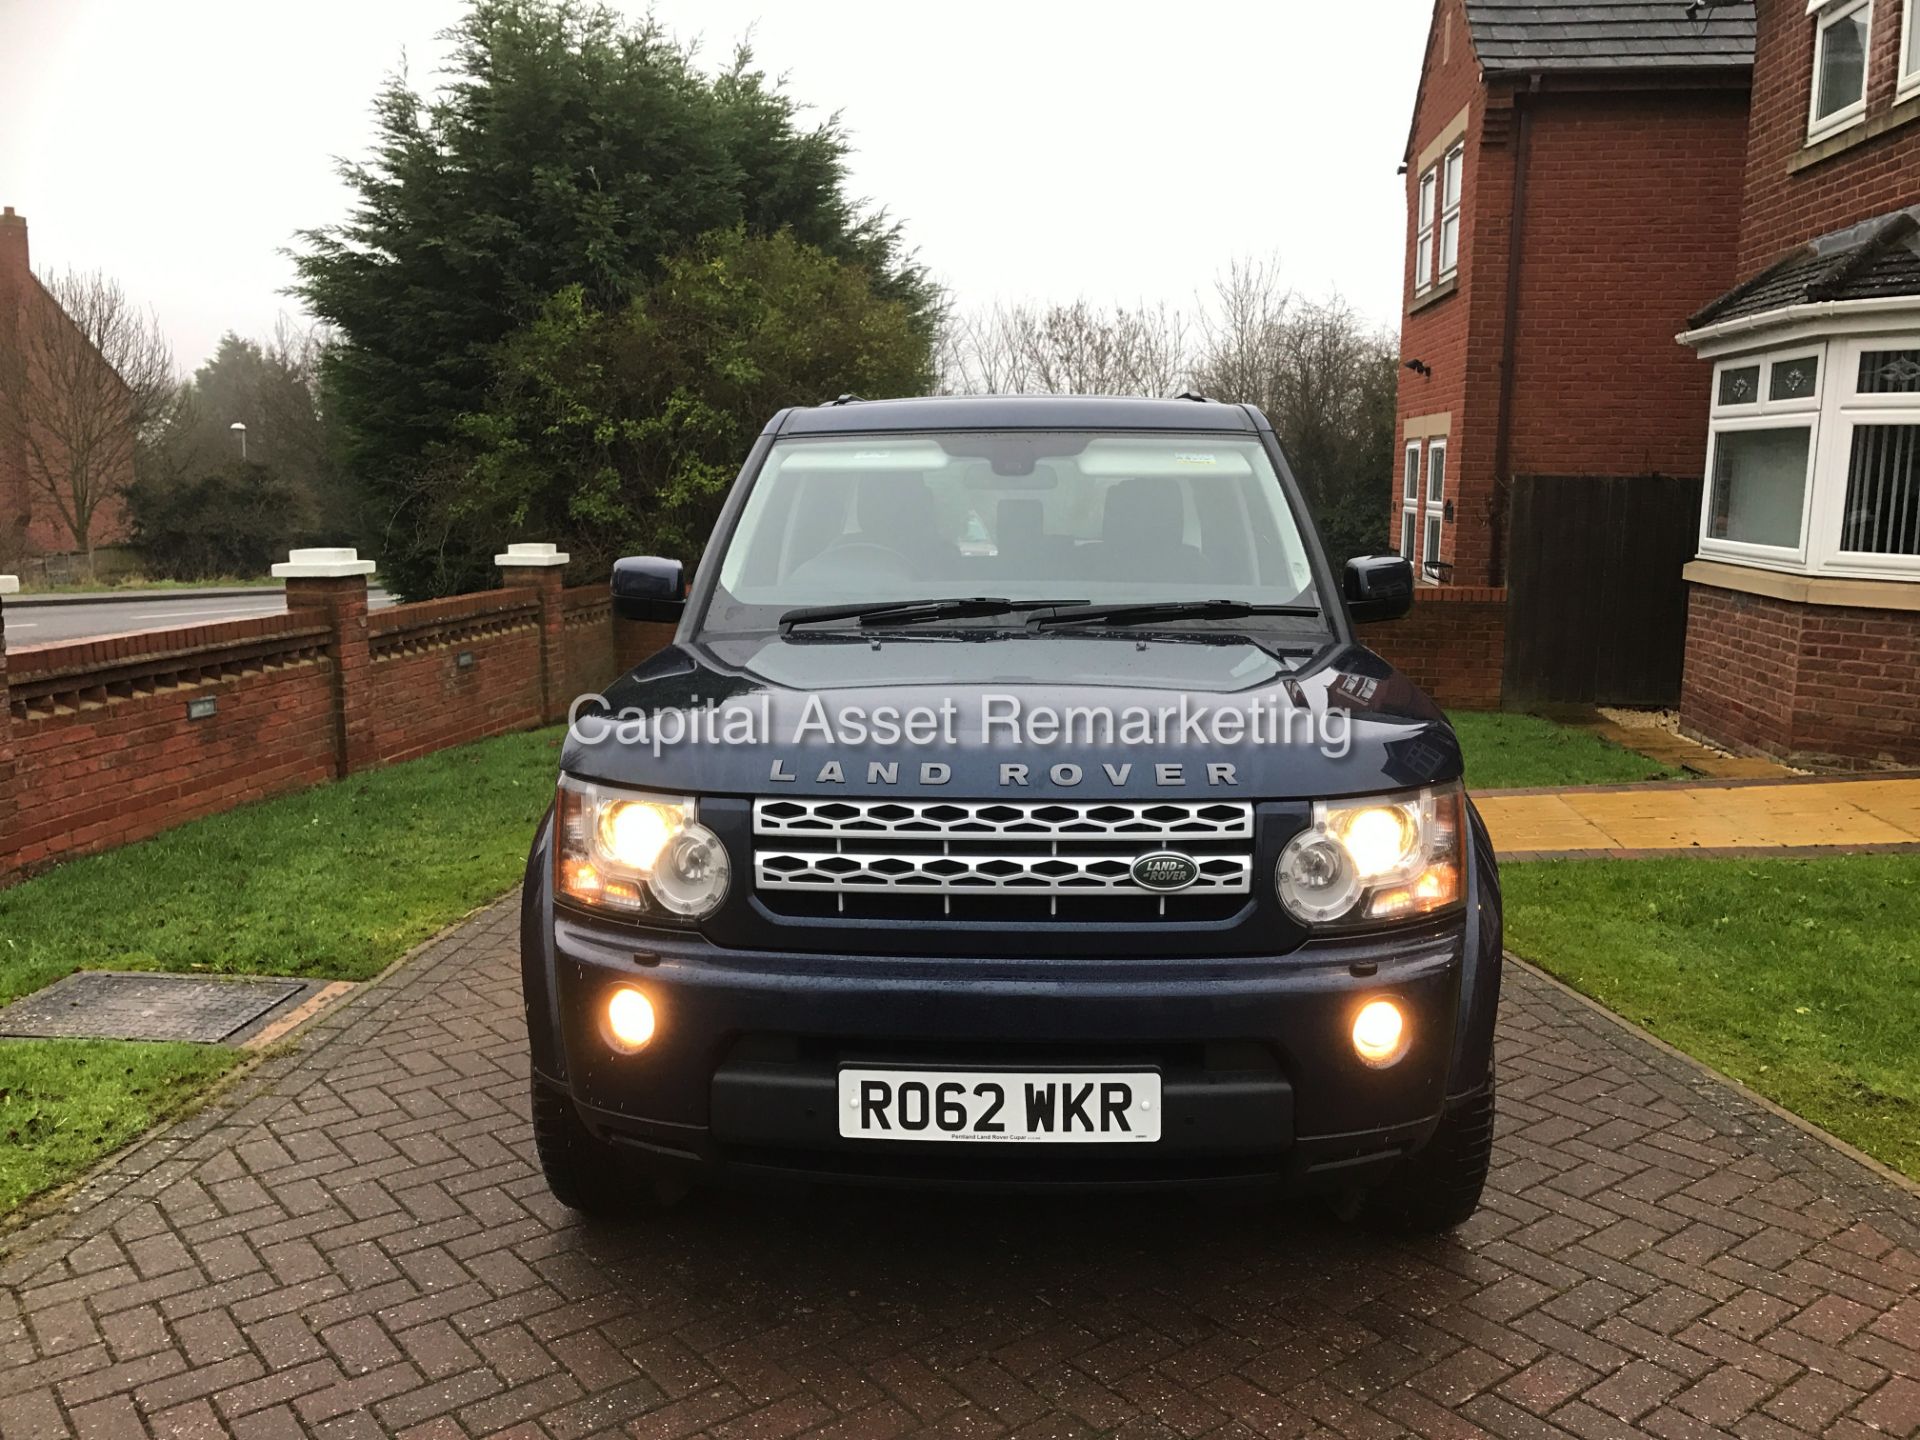 LANDROVER DISCOVERY 3.0 "SDV6 - XS" AUTO (2013 MODEL) 1 OWNER - LOW MILES / FSH - NAV - LEATHER - Image 2 of 21